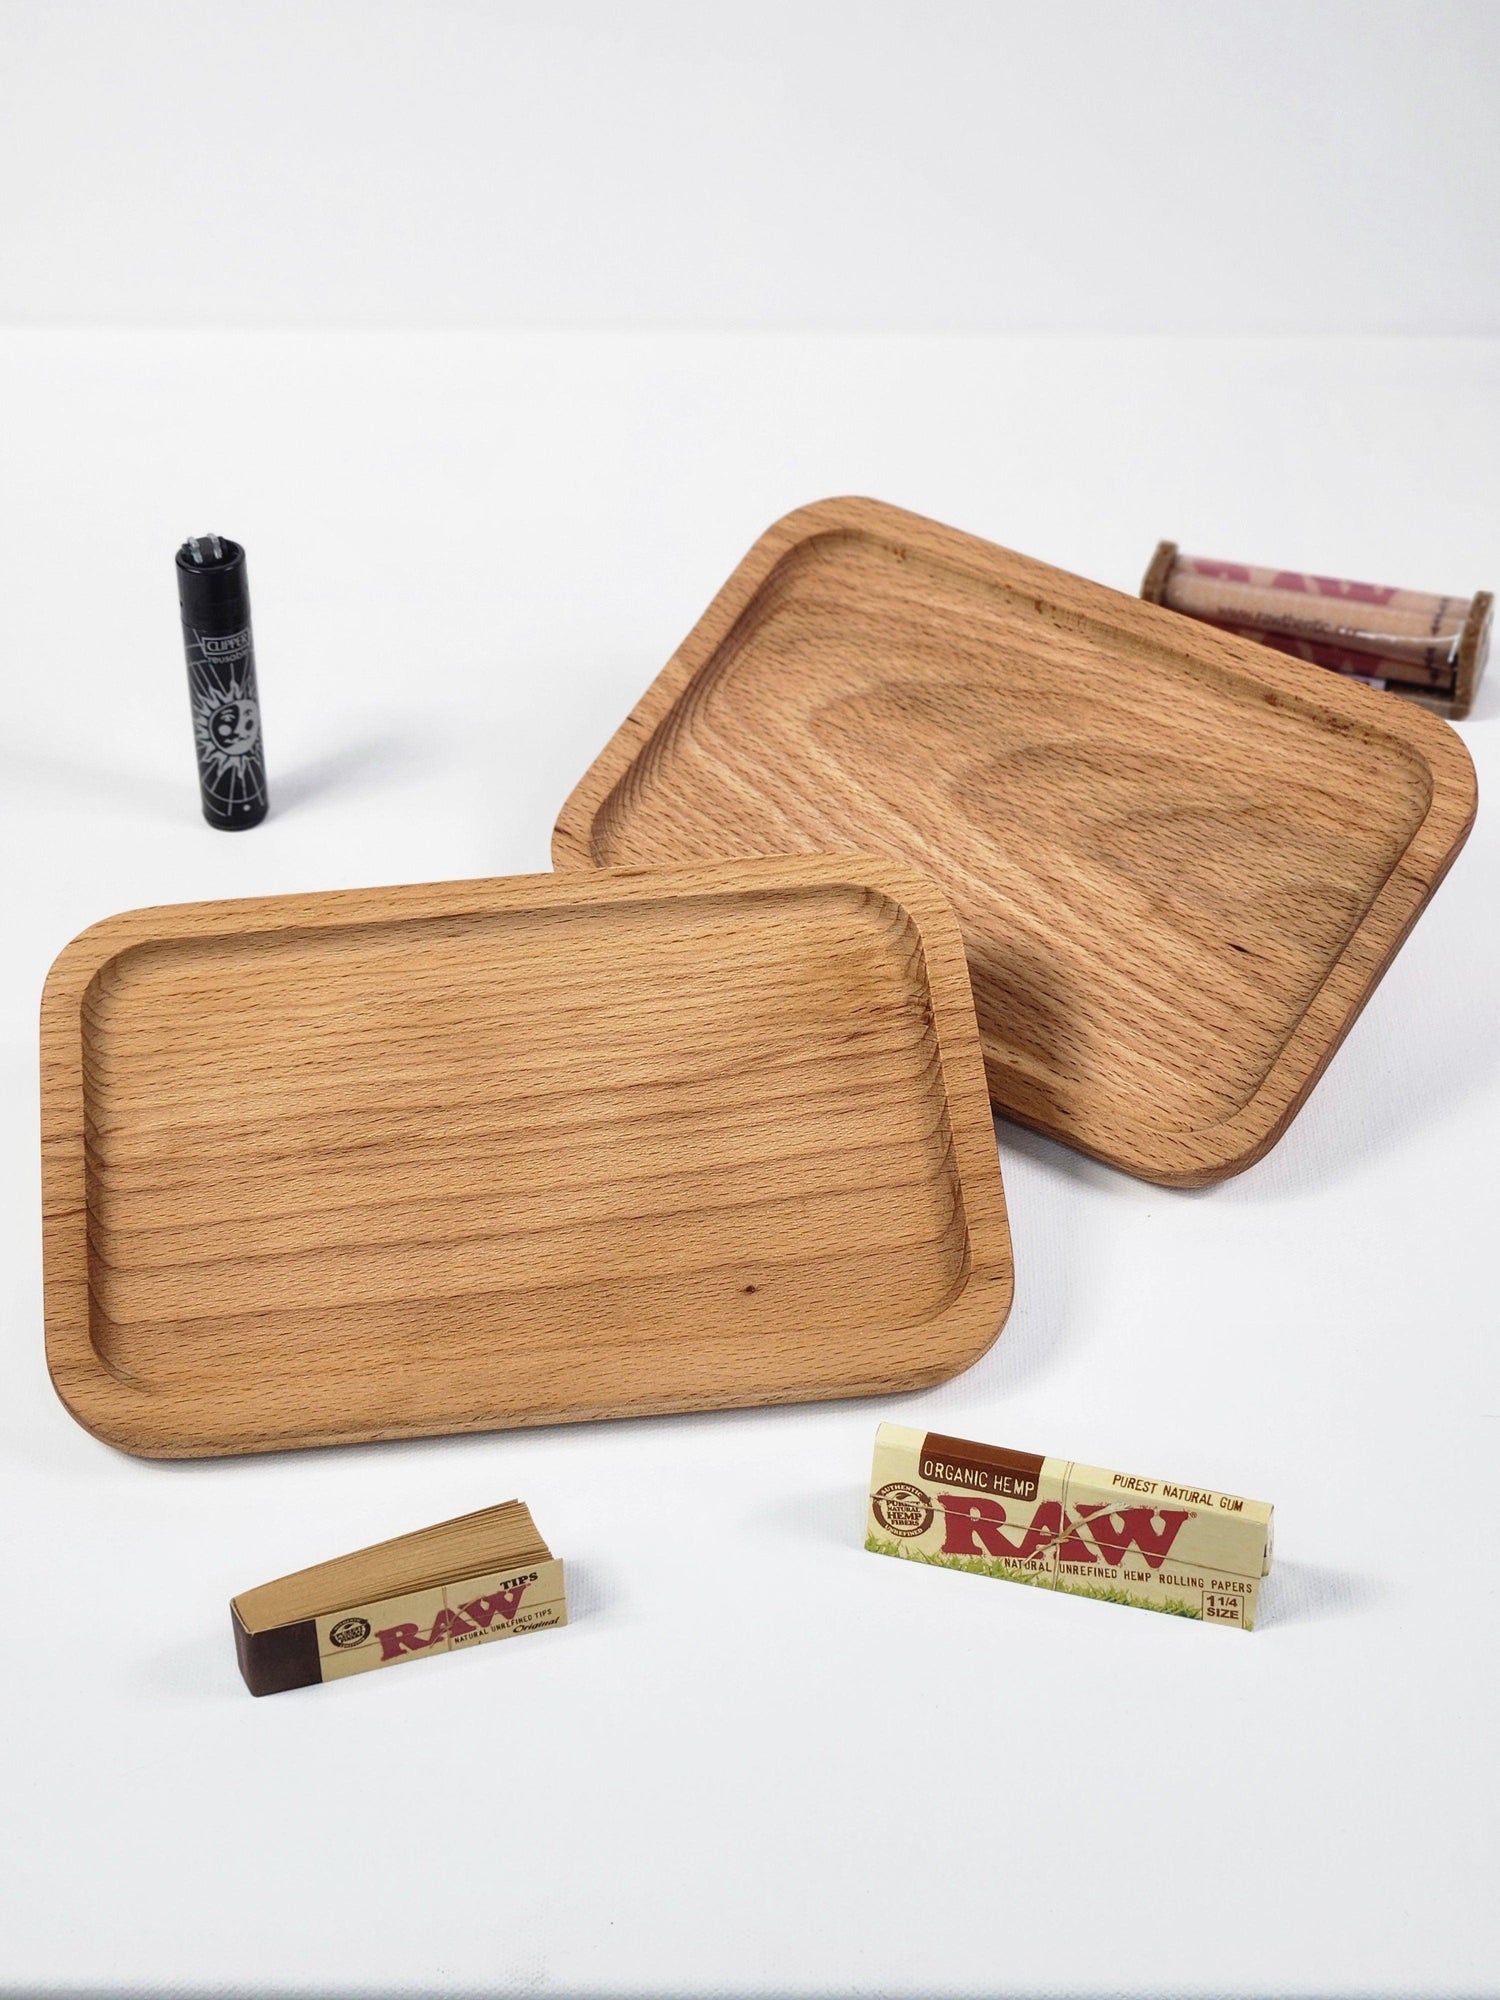 Rolling Tray Engravings